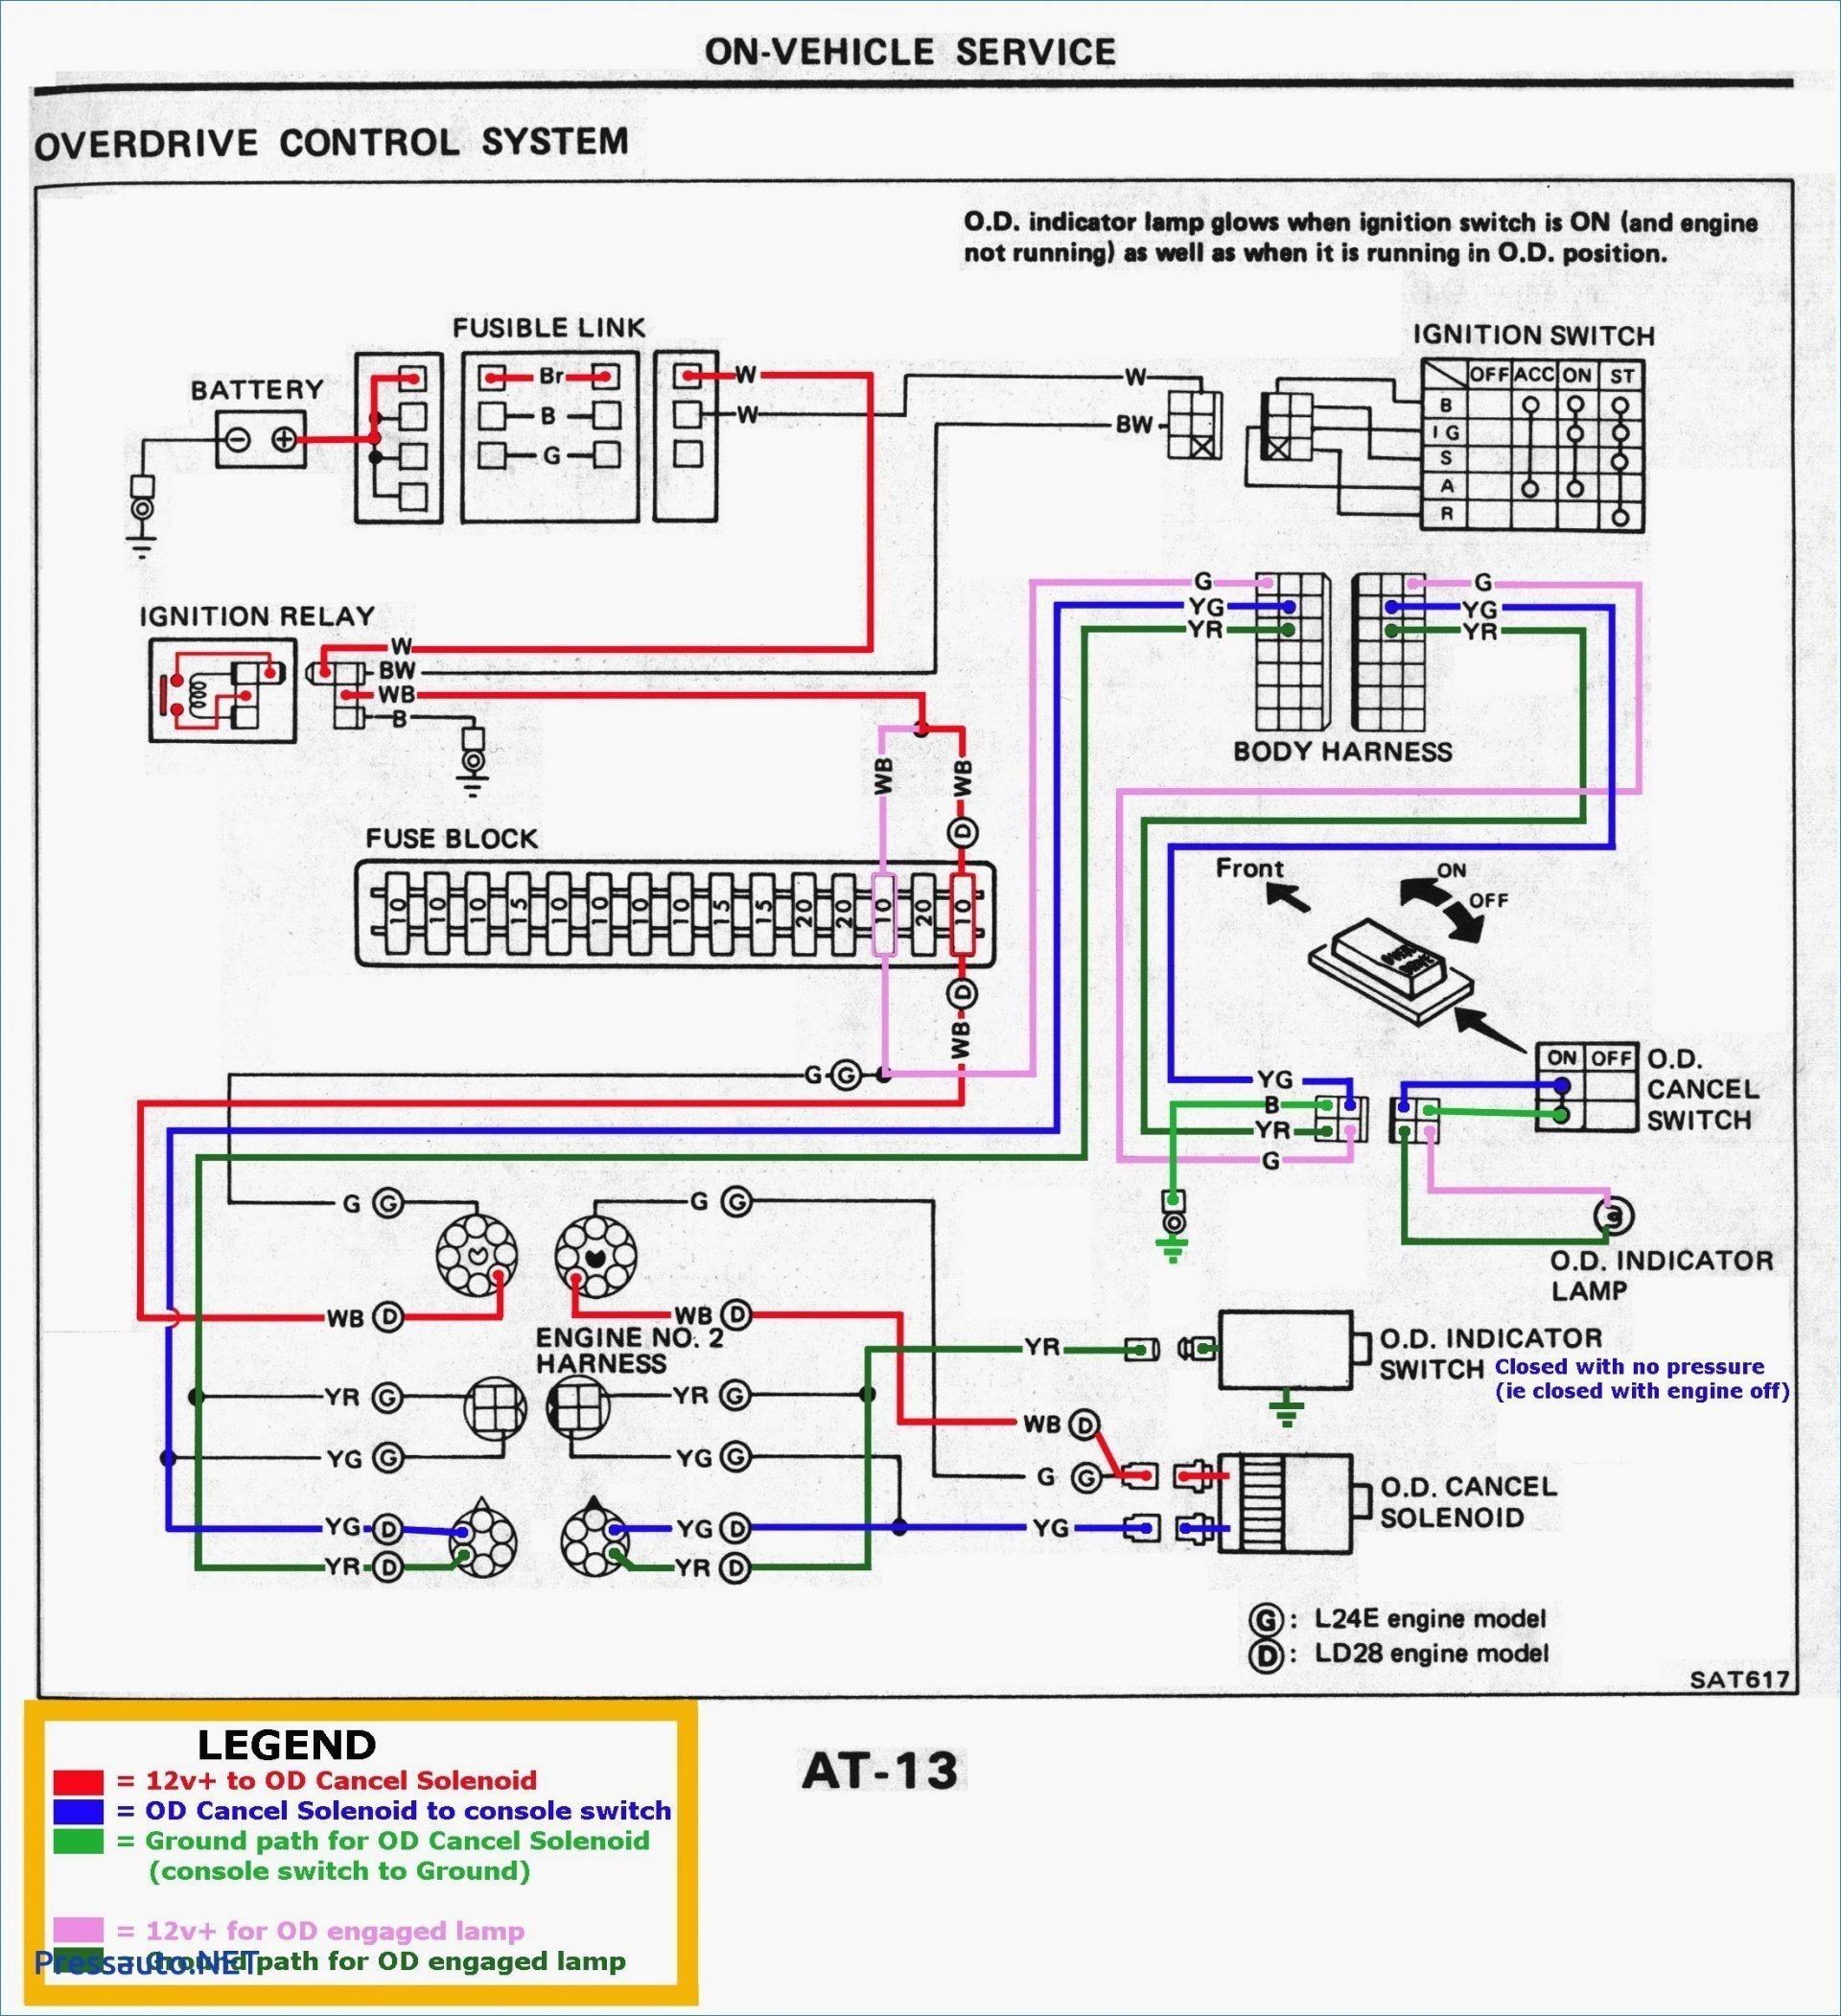 Extension Cord Wiring Diagram Australia New Basic House Wiring Diagram Best House Electrical Wiring Diagram